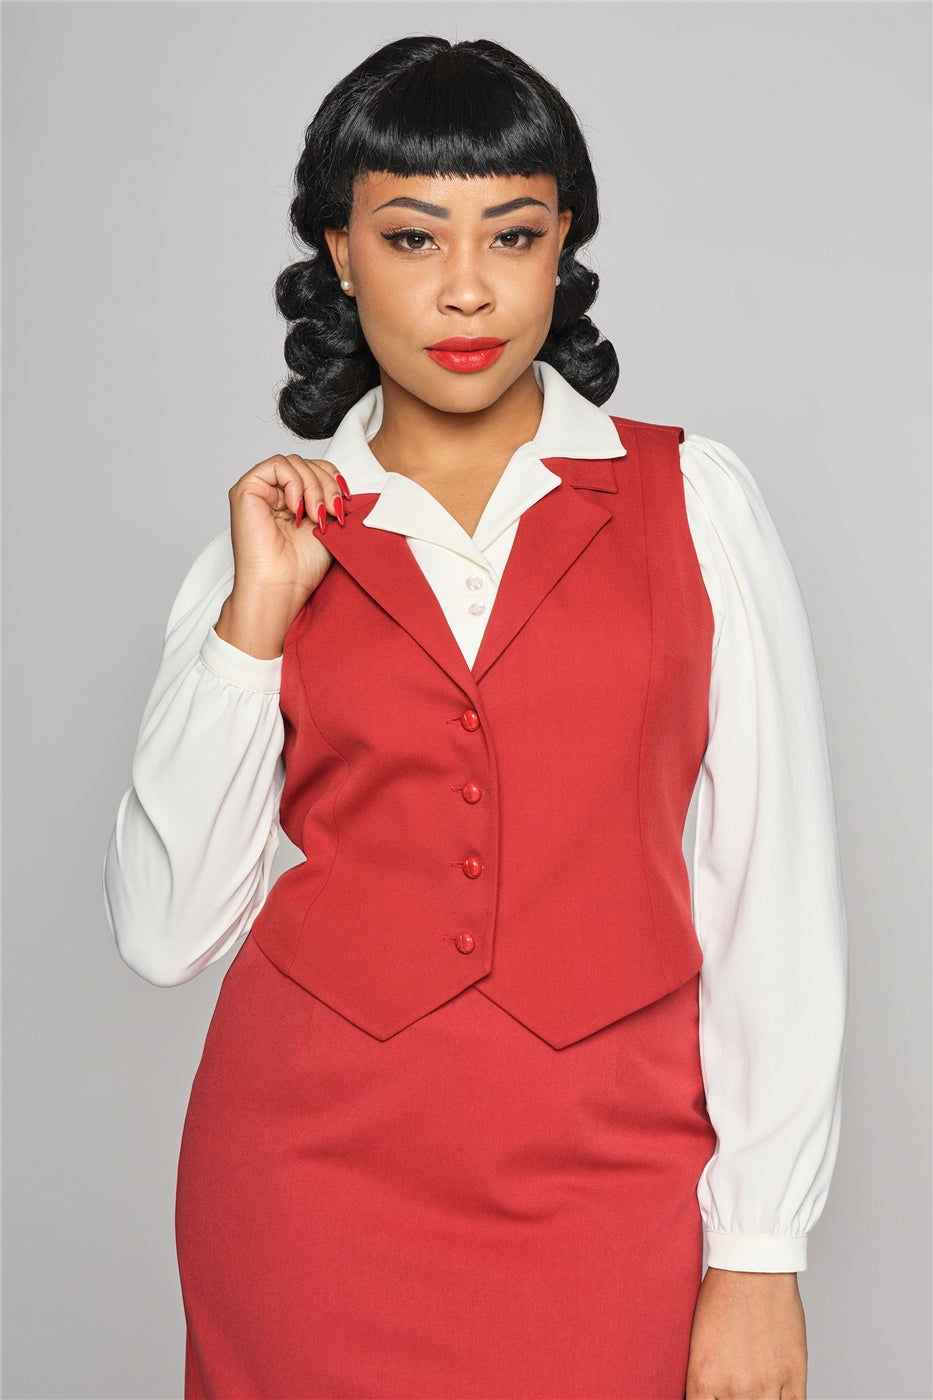 Dark haired woman with dark hair, brown eyes and vintage style makeup wearing the Professor red waist coat over the ivory Pepper blouse and a red pencil skirt